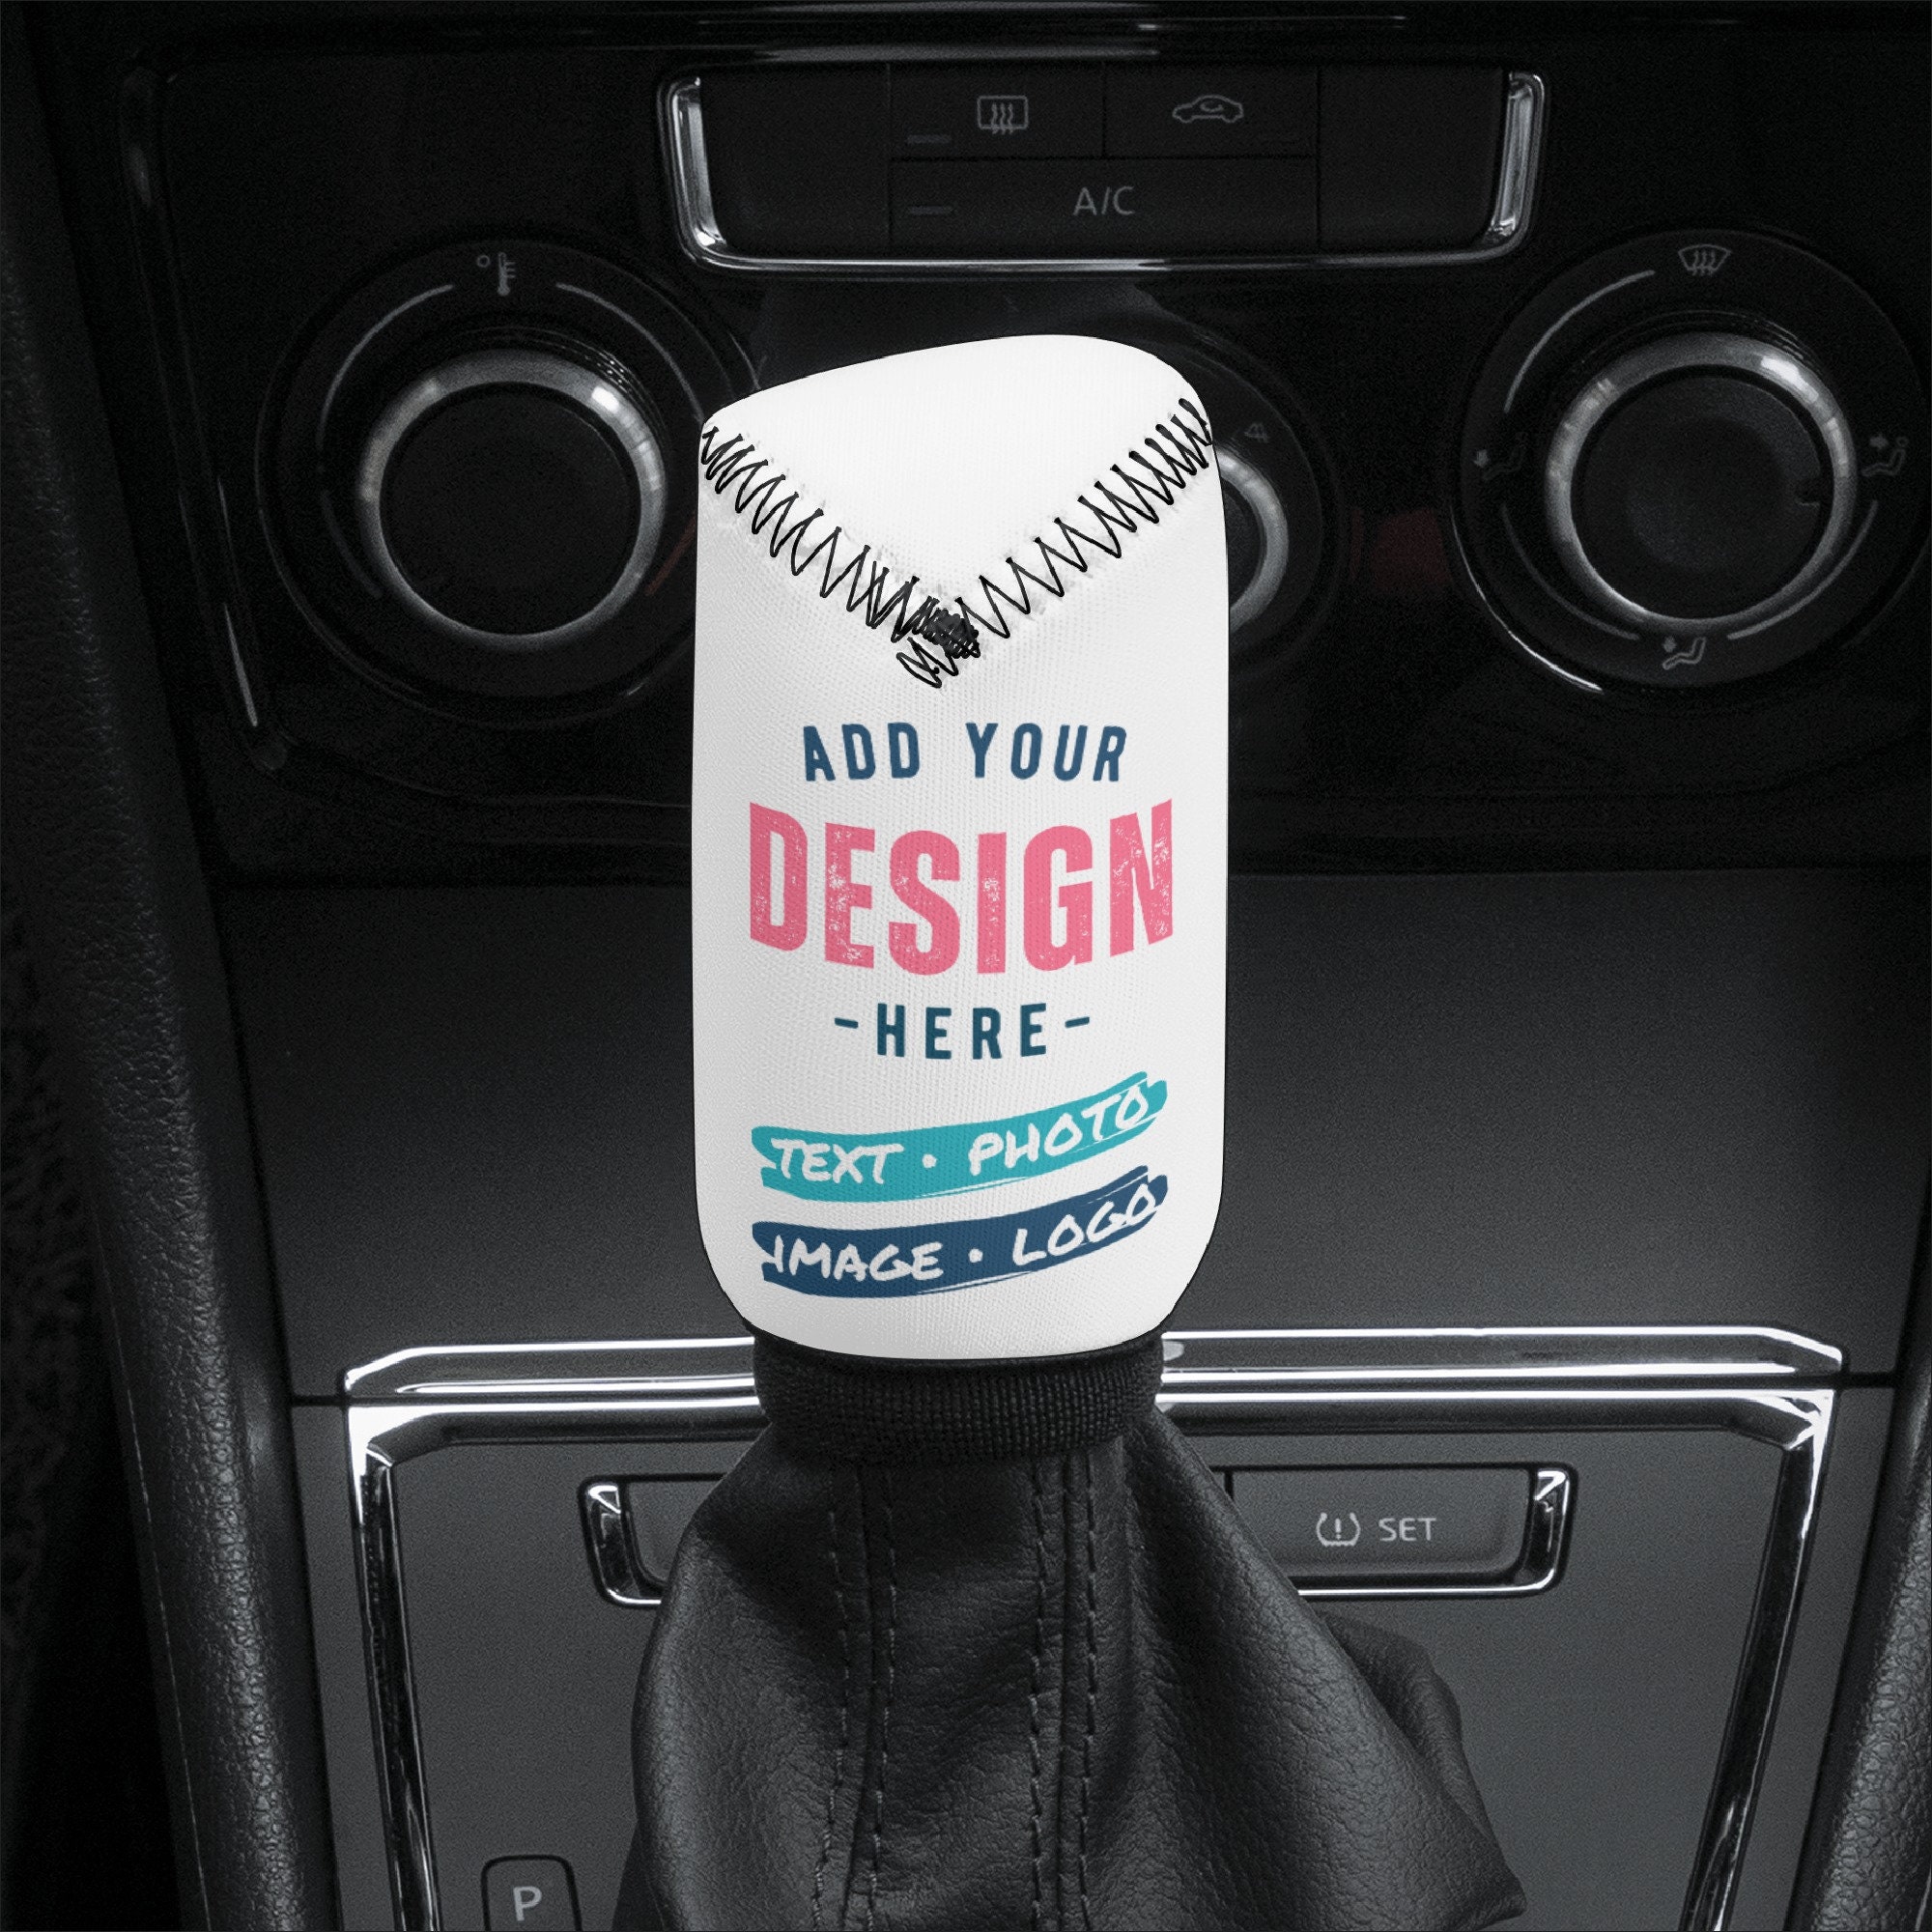 Funny Shift Knob Hoodie Cover for Car Shifter Knob Fits Manual and  Automatic Shifts Cool Gear Handle Decoration Accessories - AliExpress